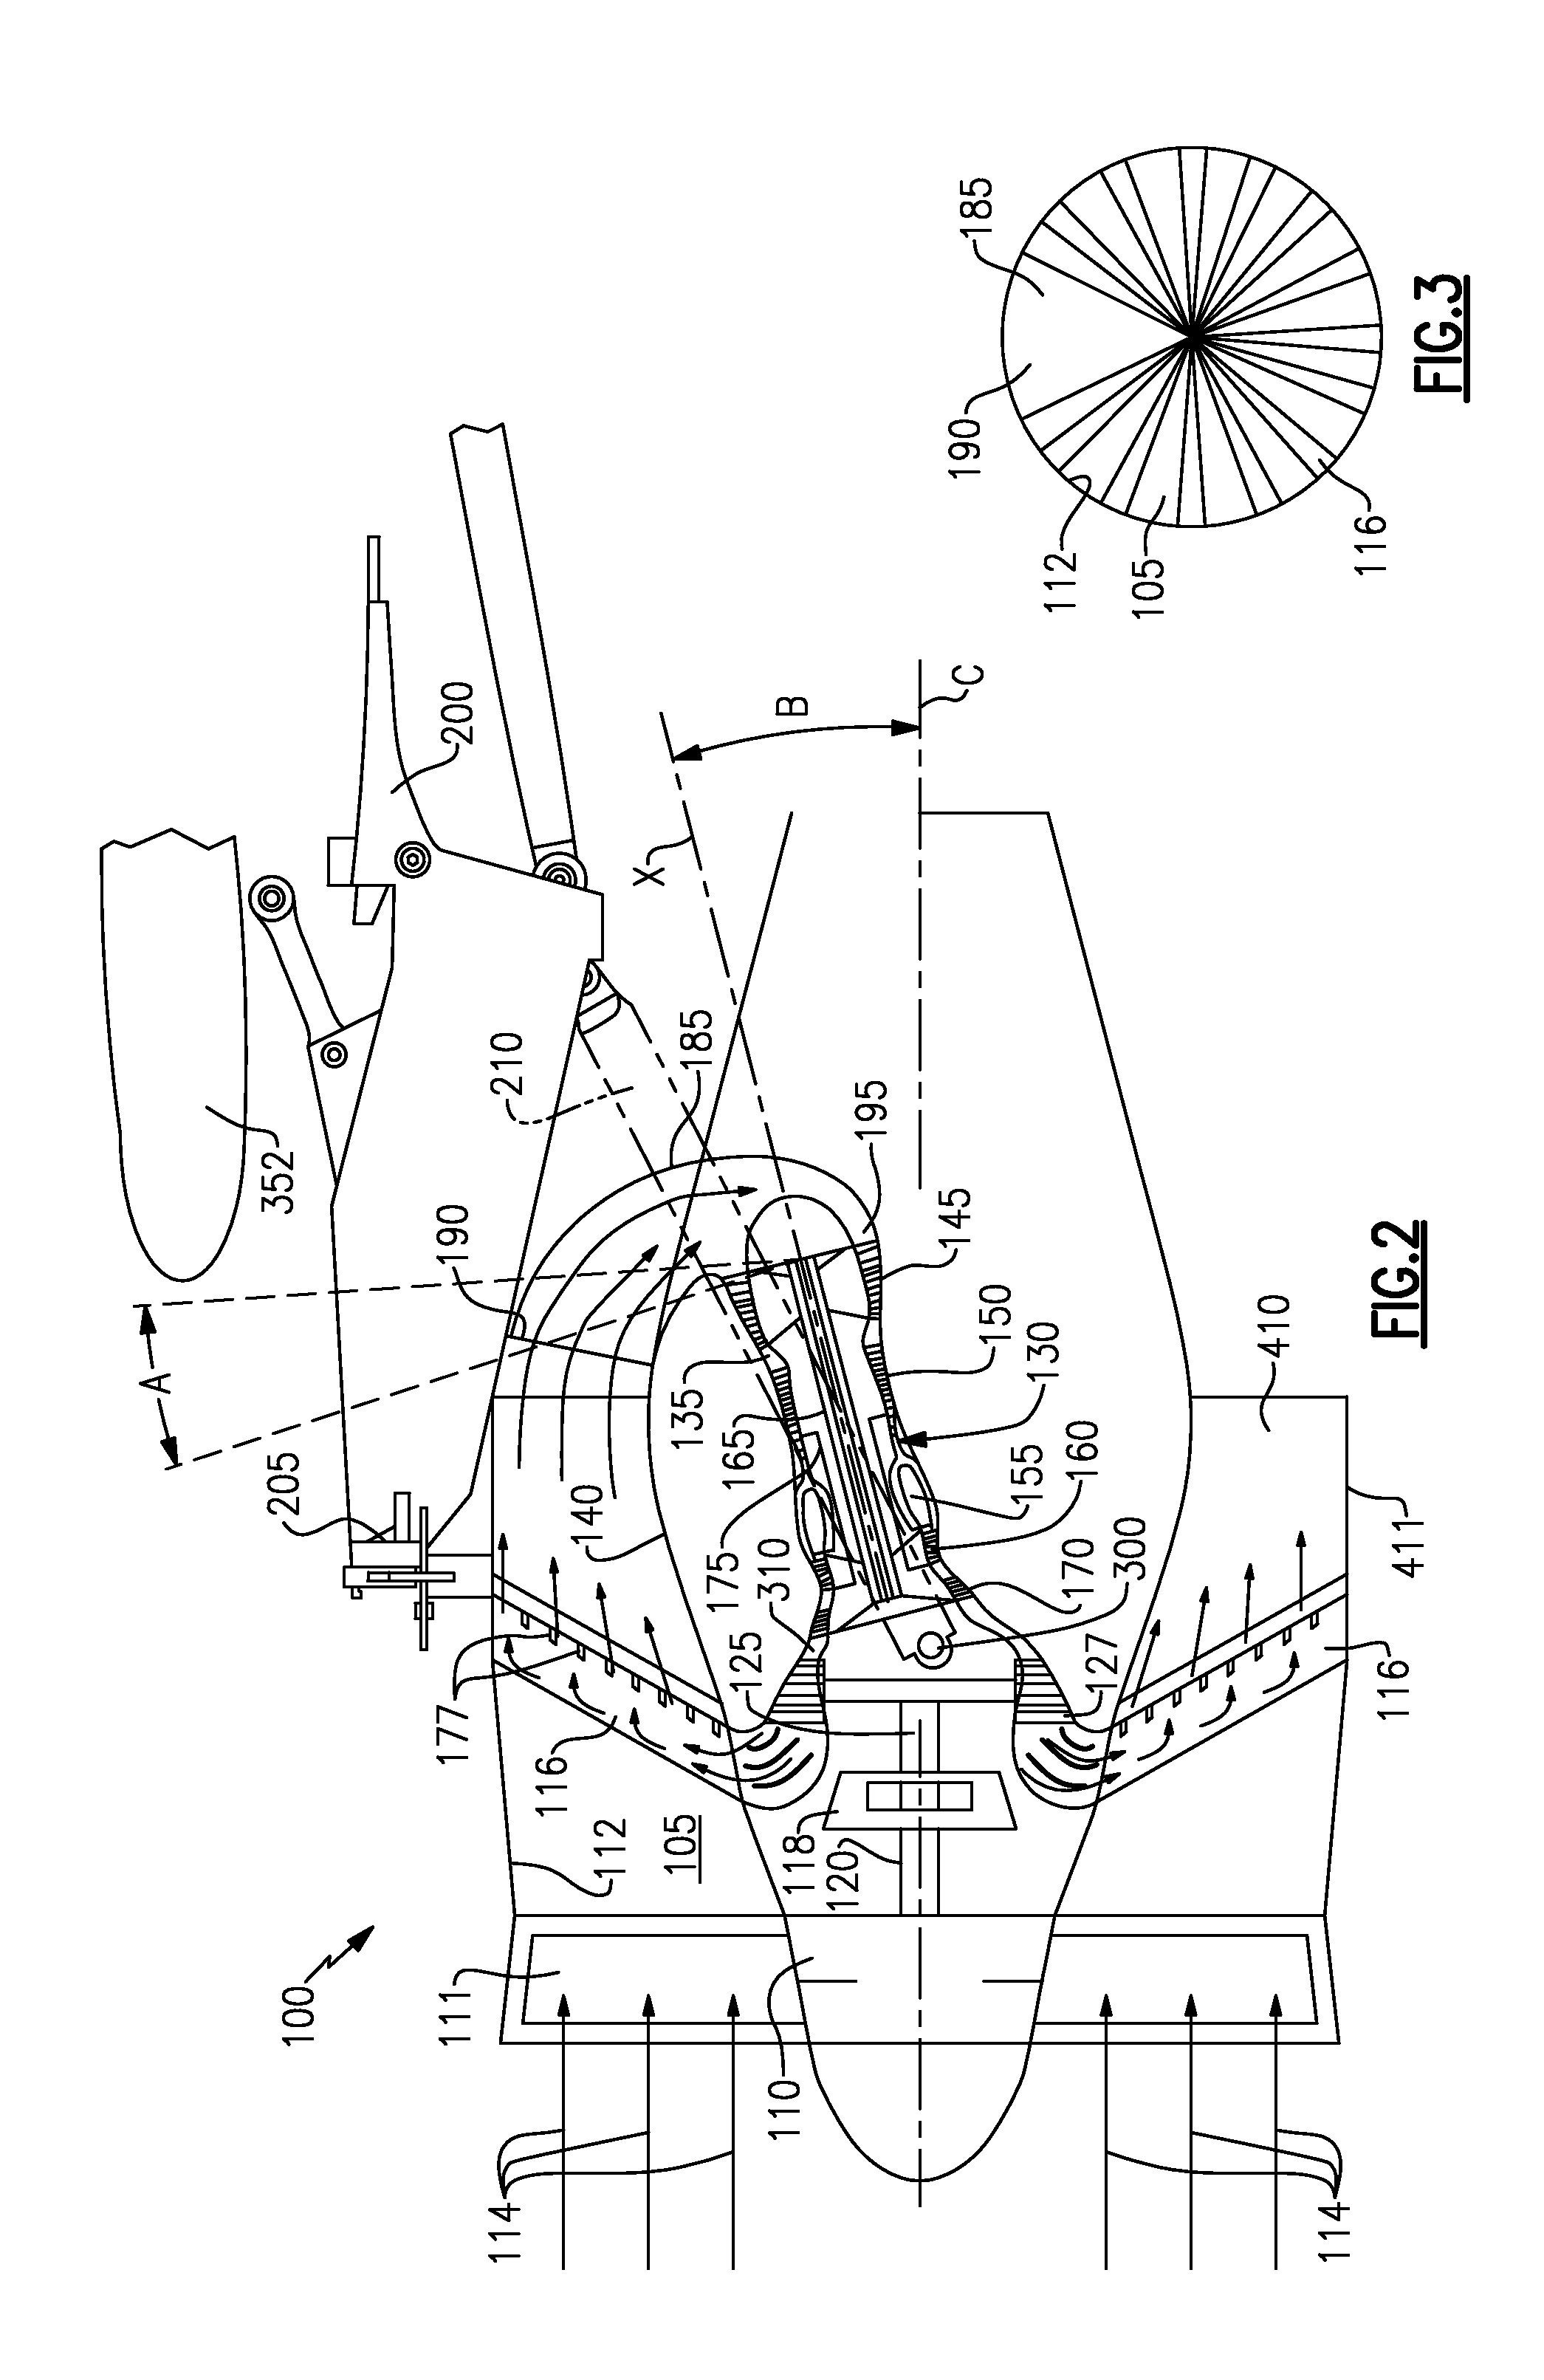 Gas turbine engine with modular cores and propulsion unit